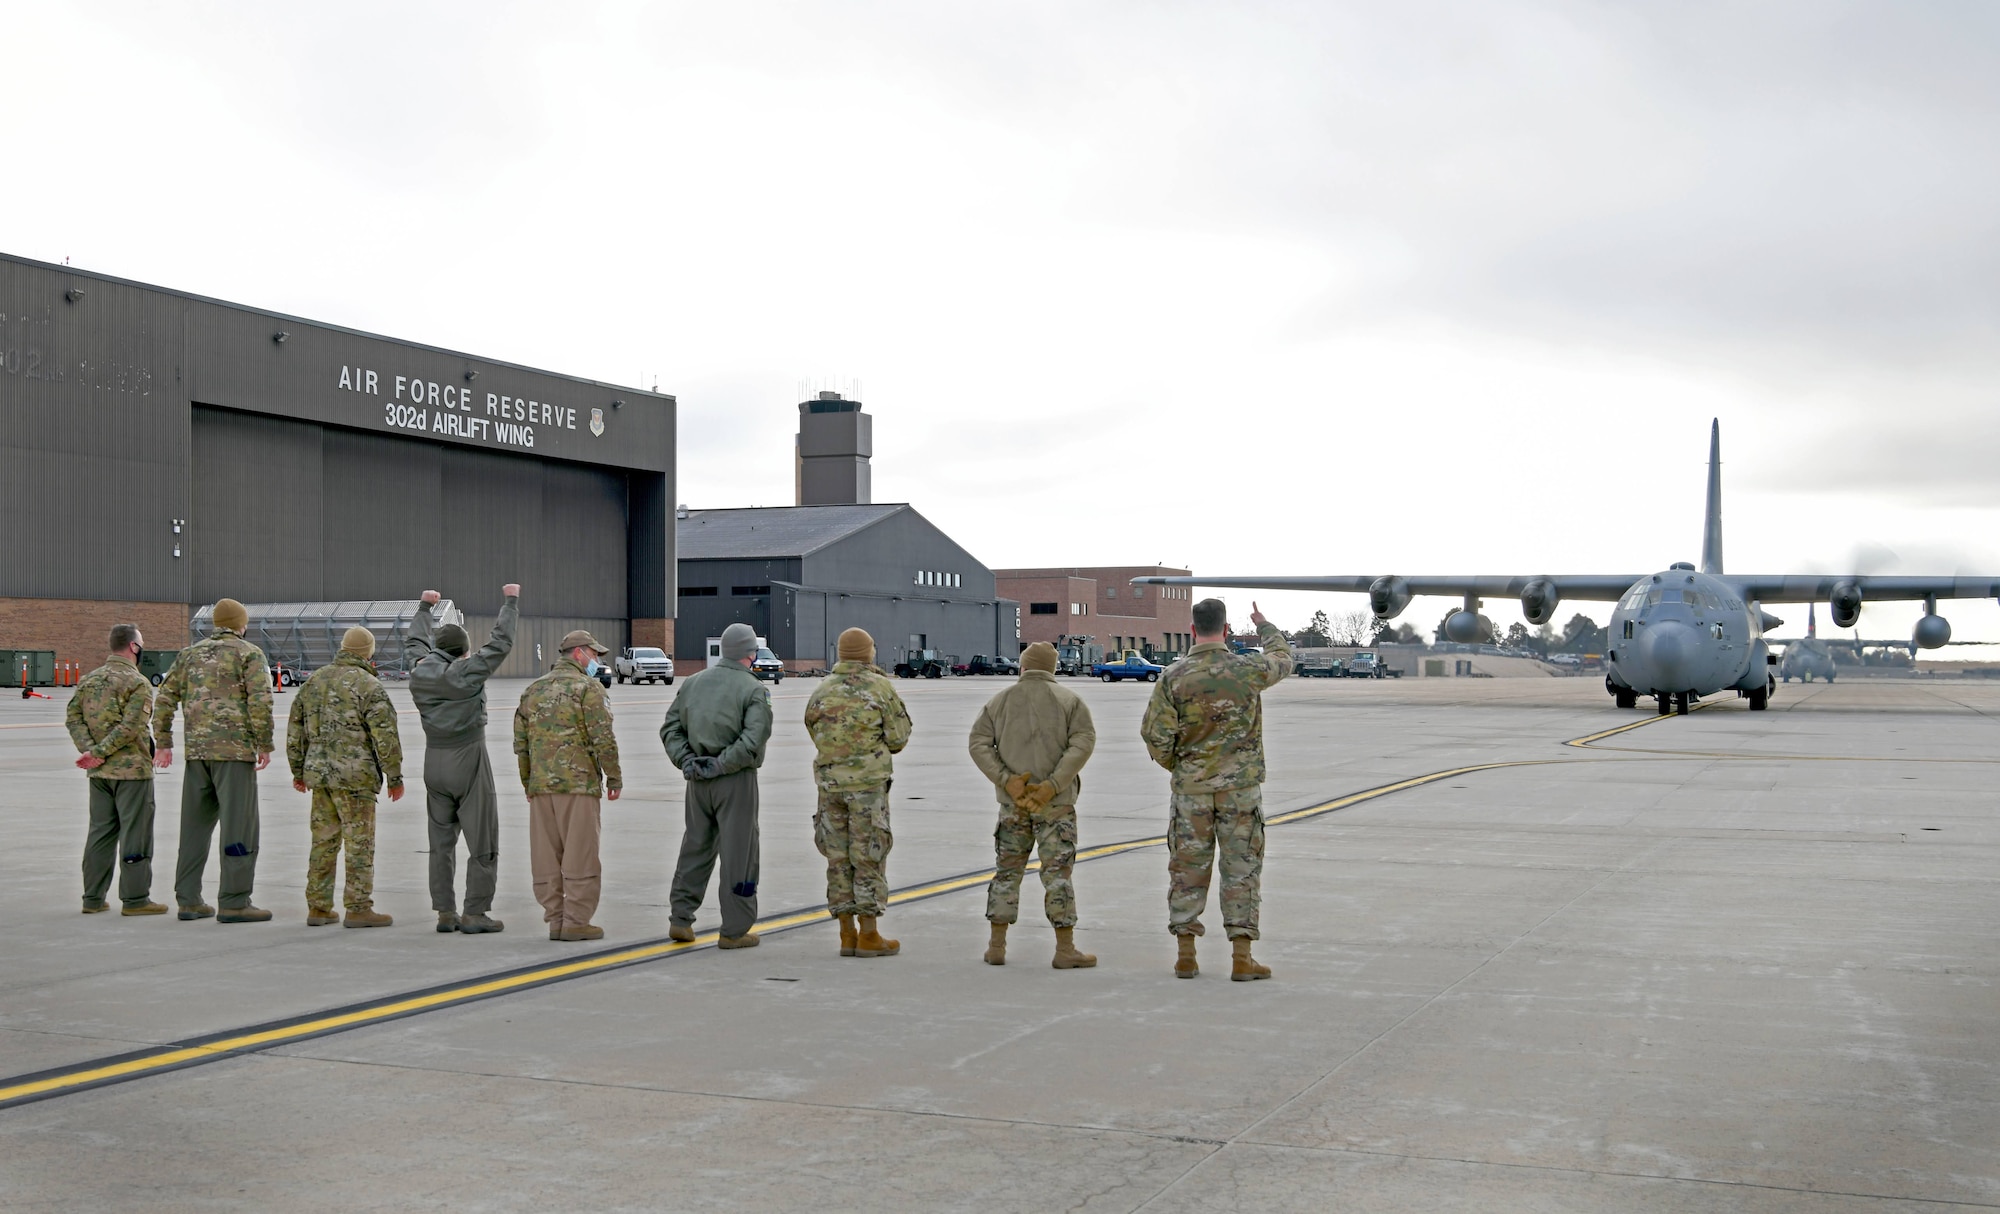 Leadership from the 302nd Airlift Wing bid an enthusiastic farewell to members aboard a C-130 aircraft before they depart to an undisclosured location Feb. 5, 2021, Peterson Air Force Base, Colorado.